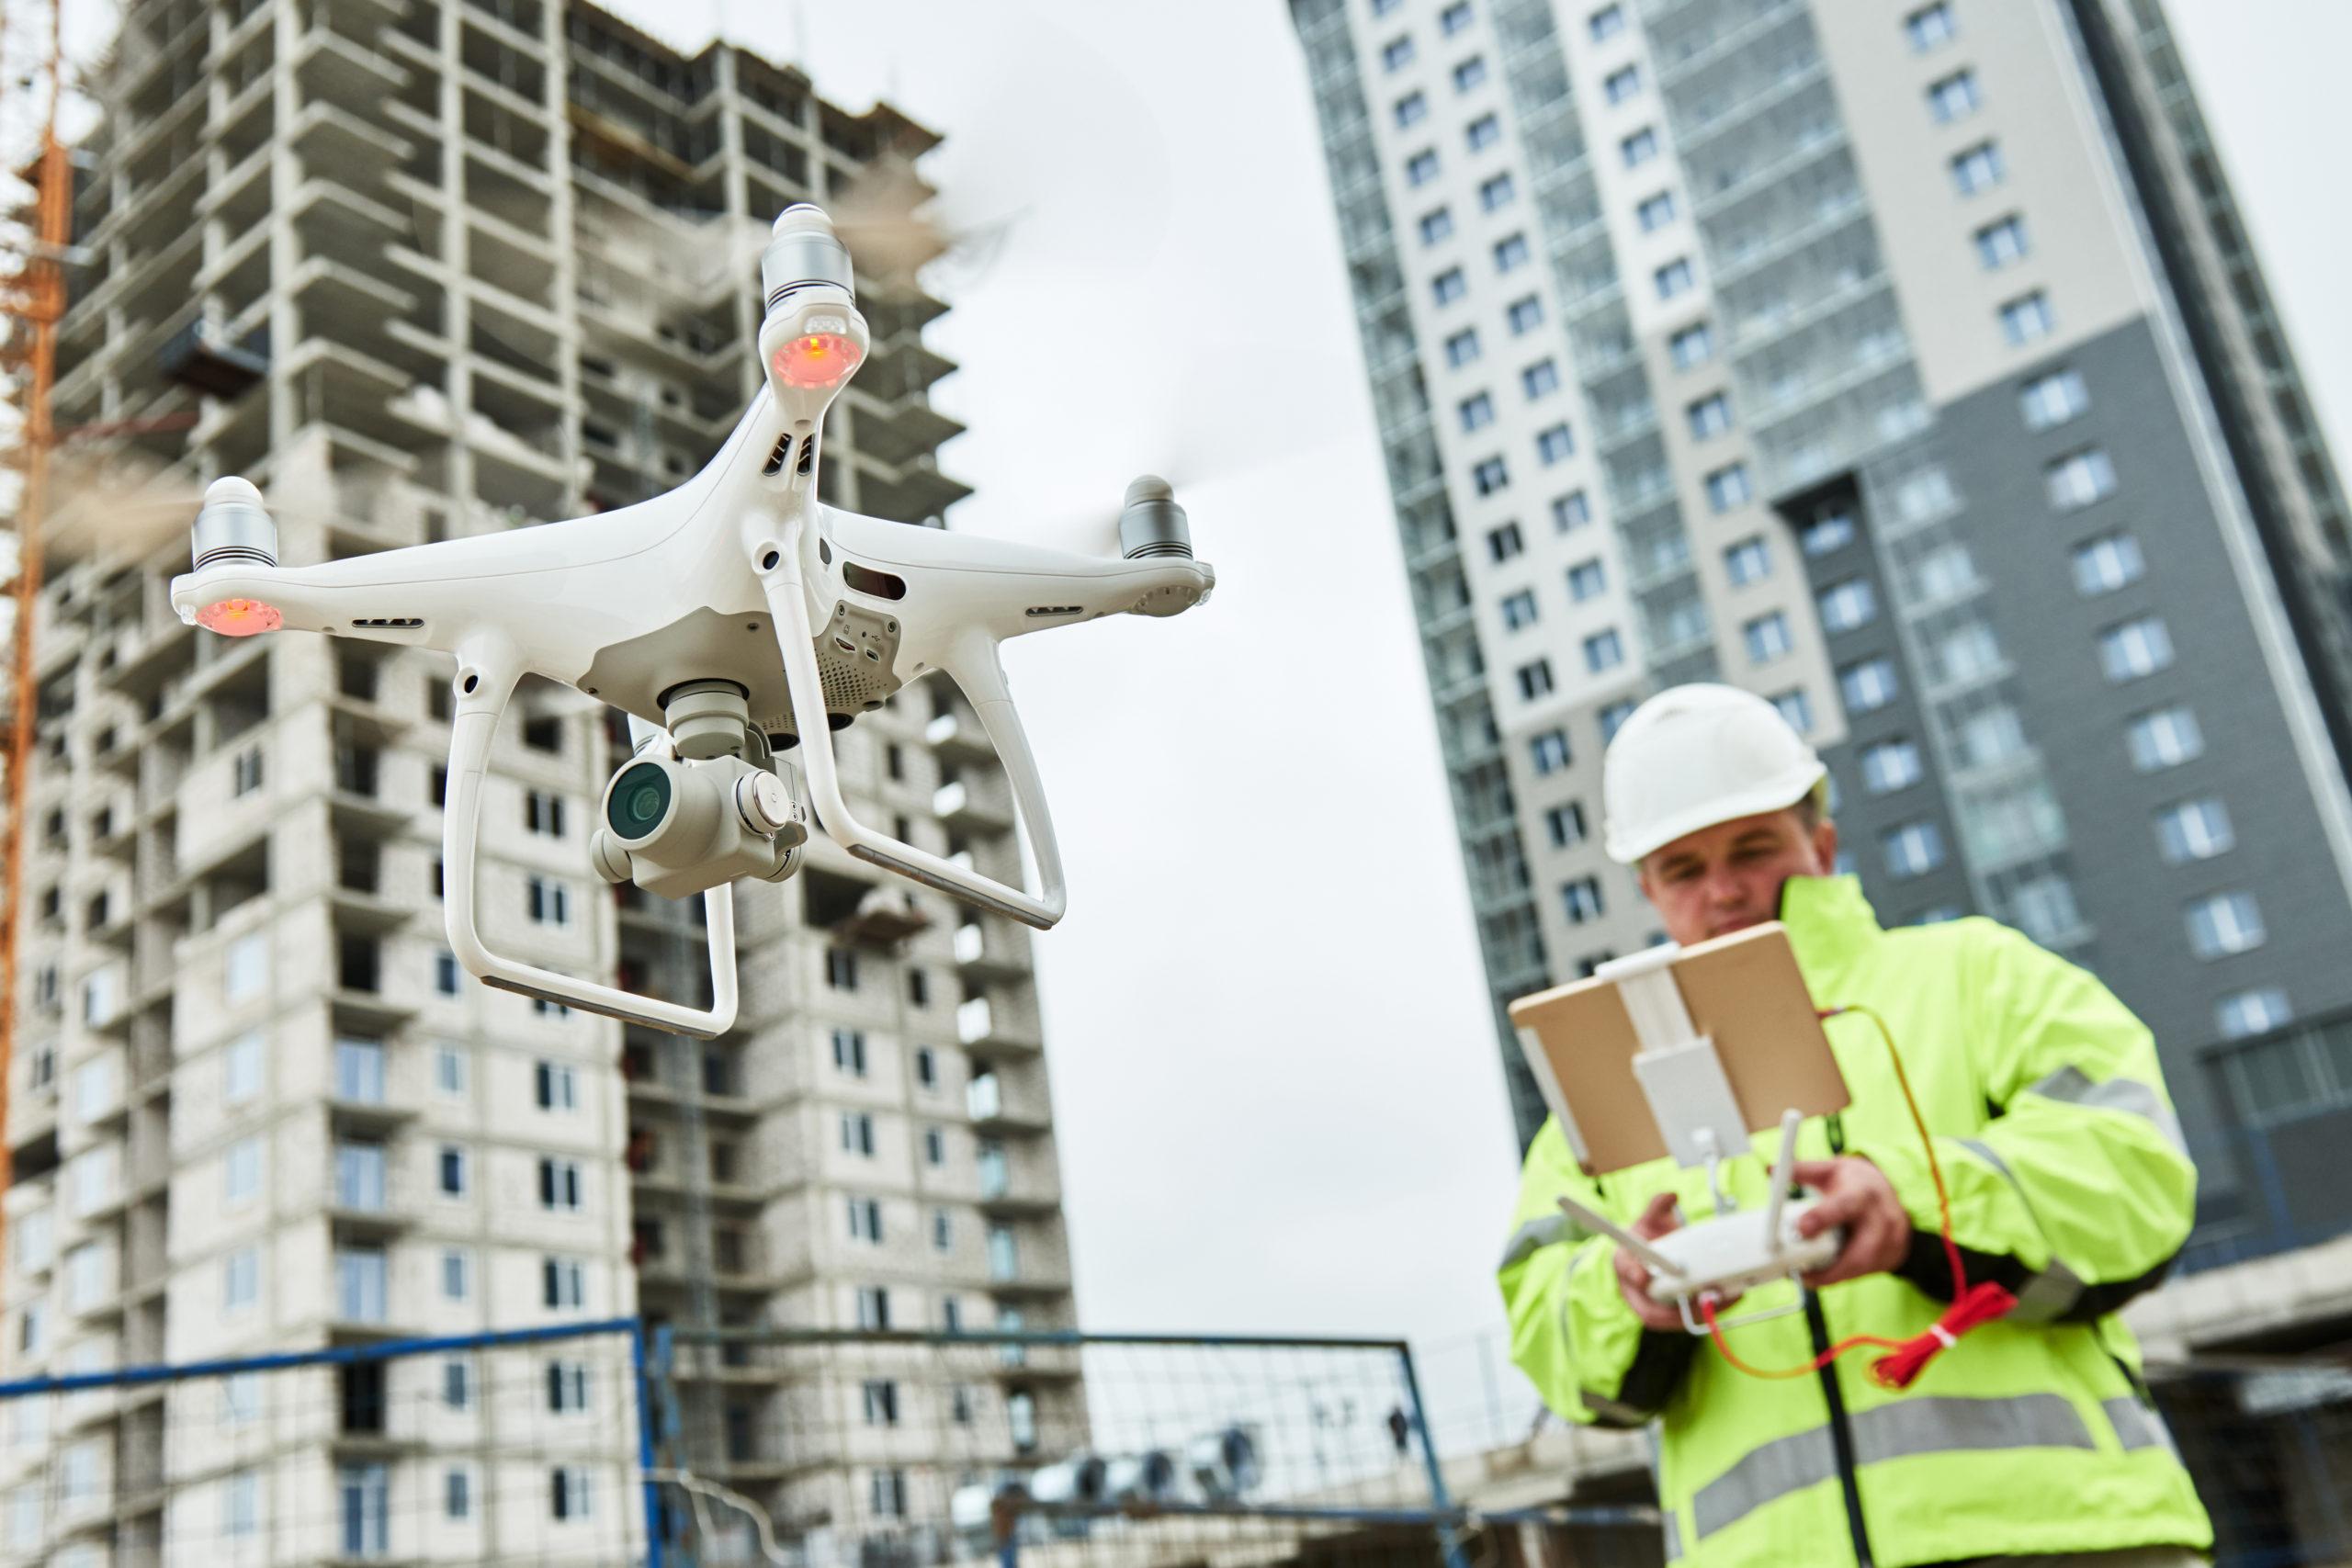 The Use of Drones for Commercial and Industrial Purposes